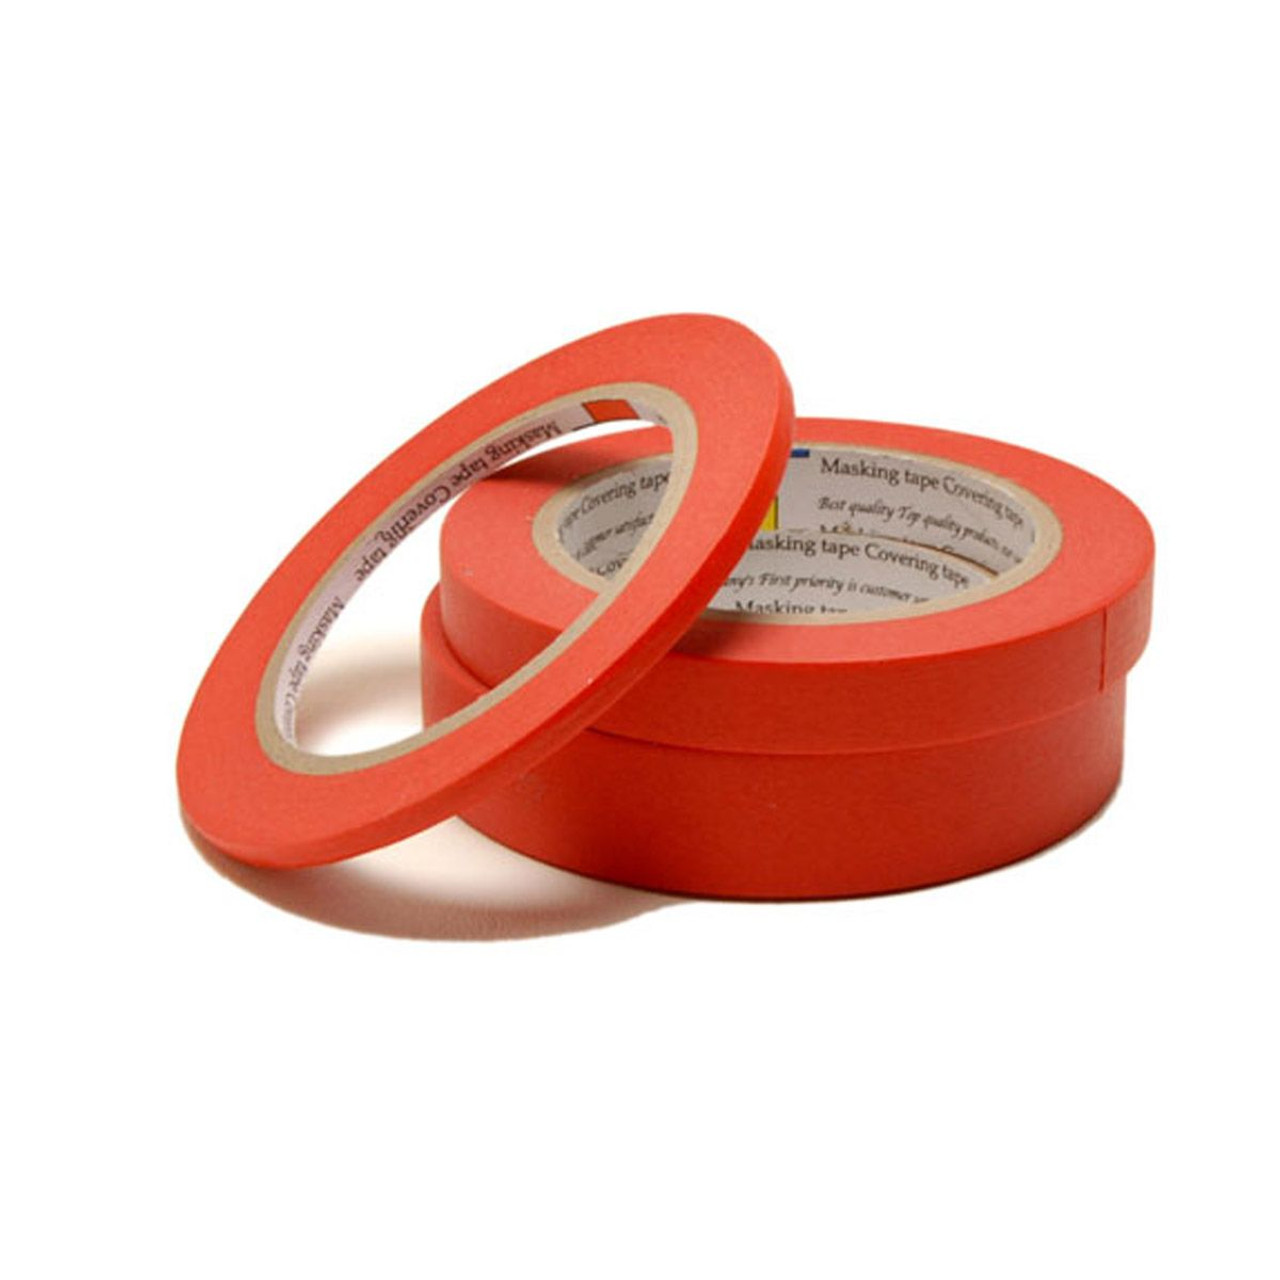 What is masking tape? Let's see what it's made of and used for